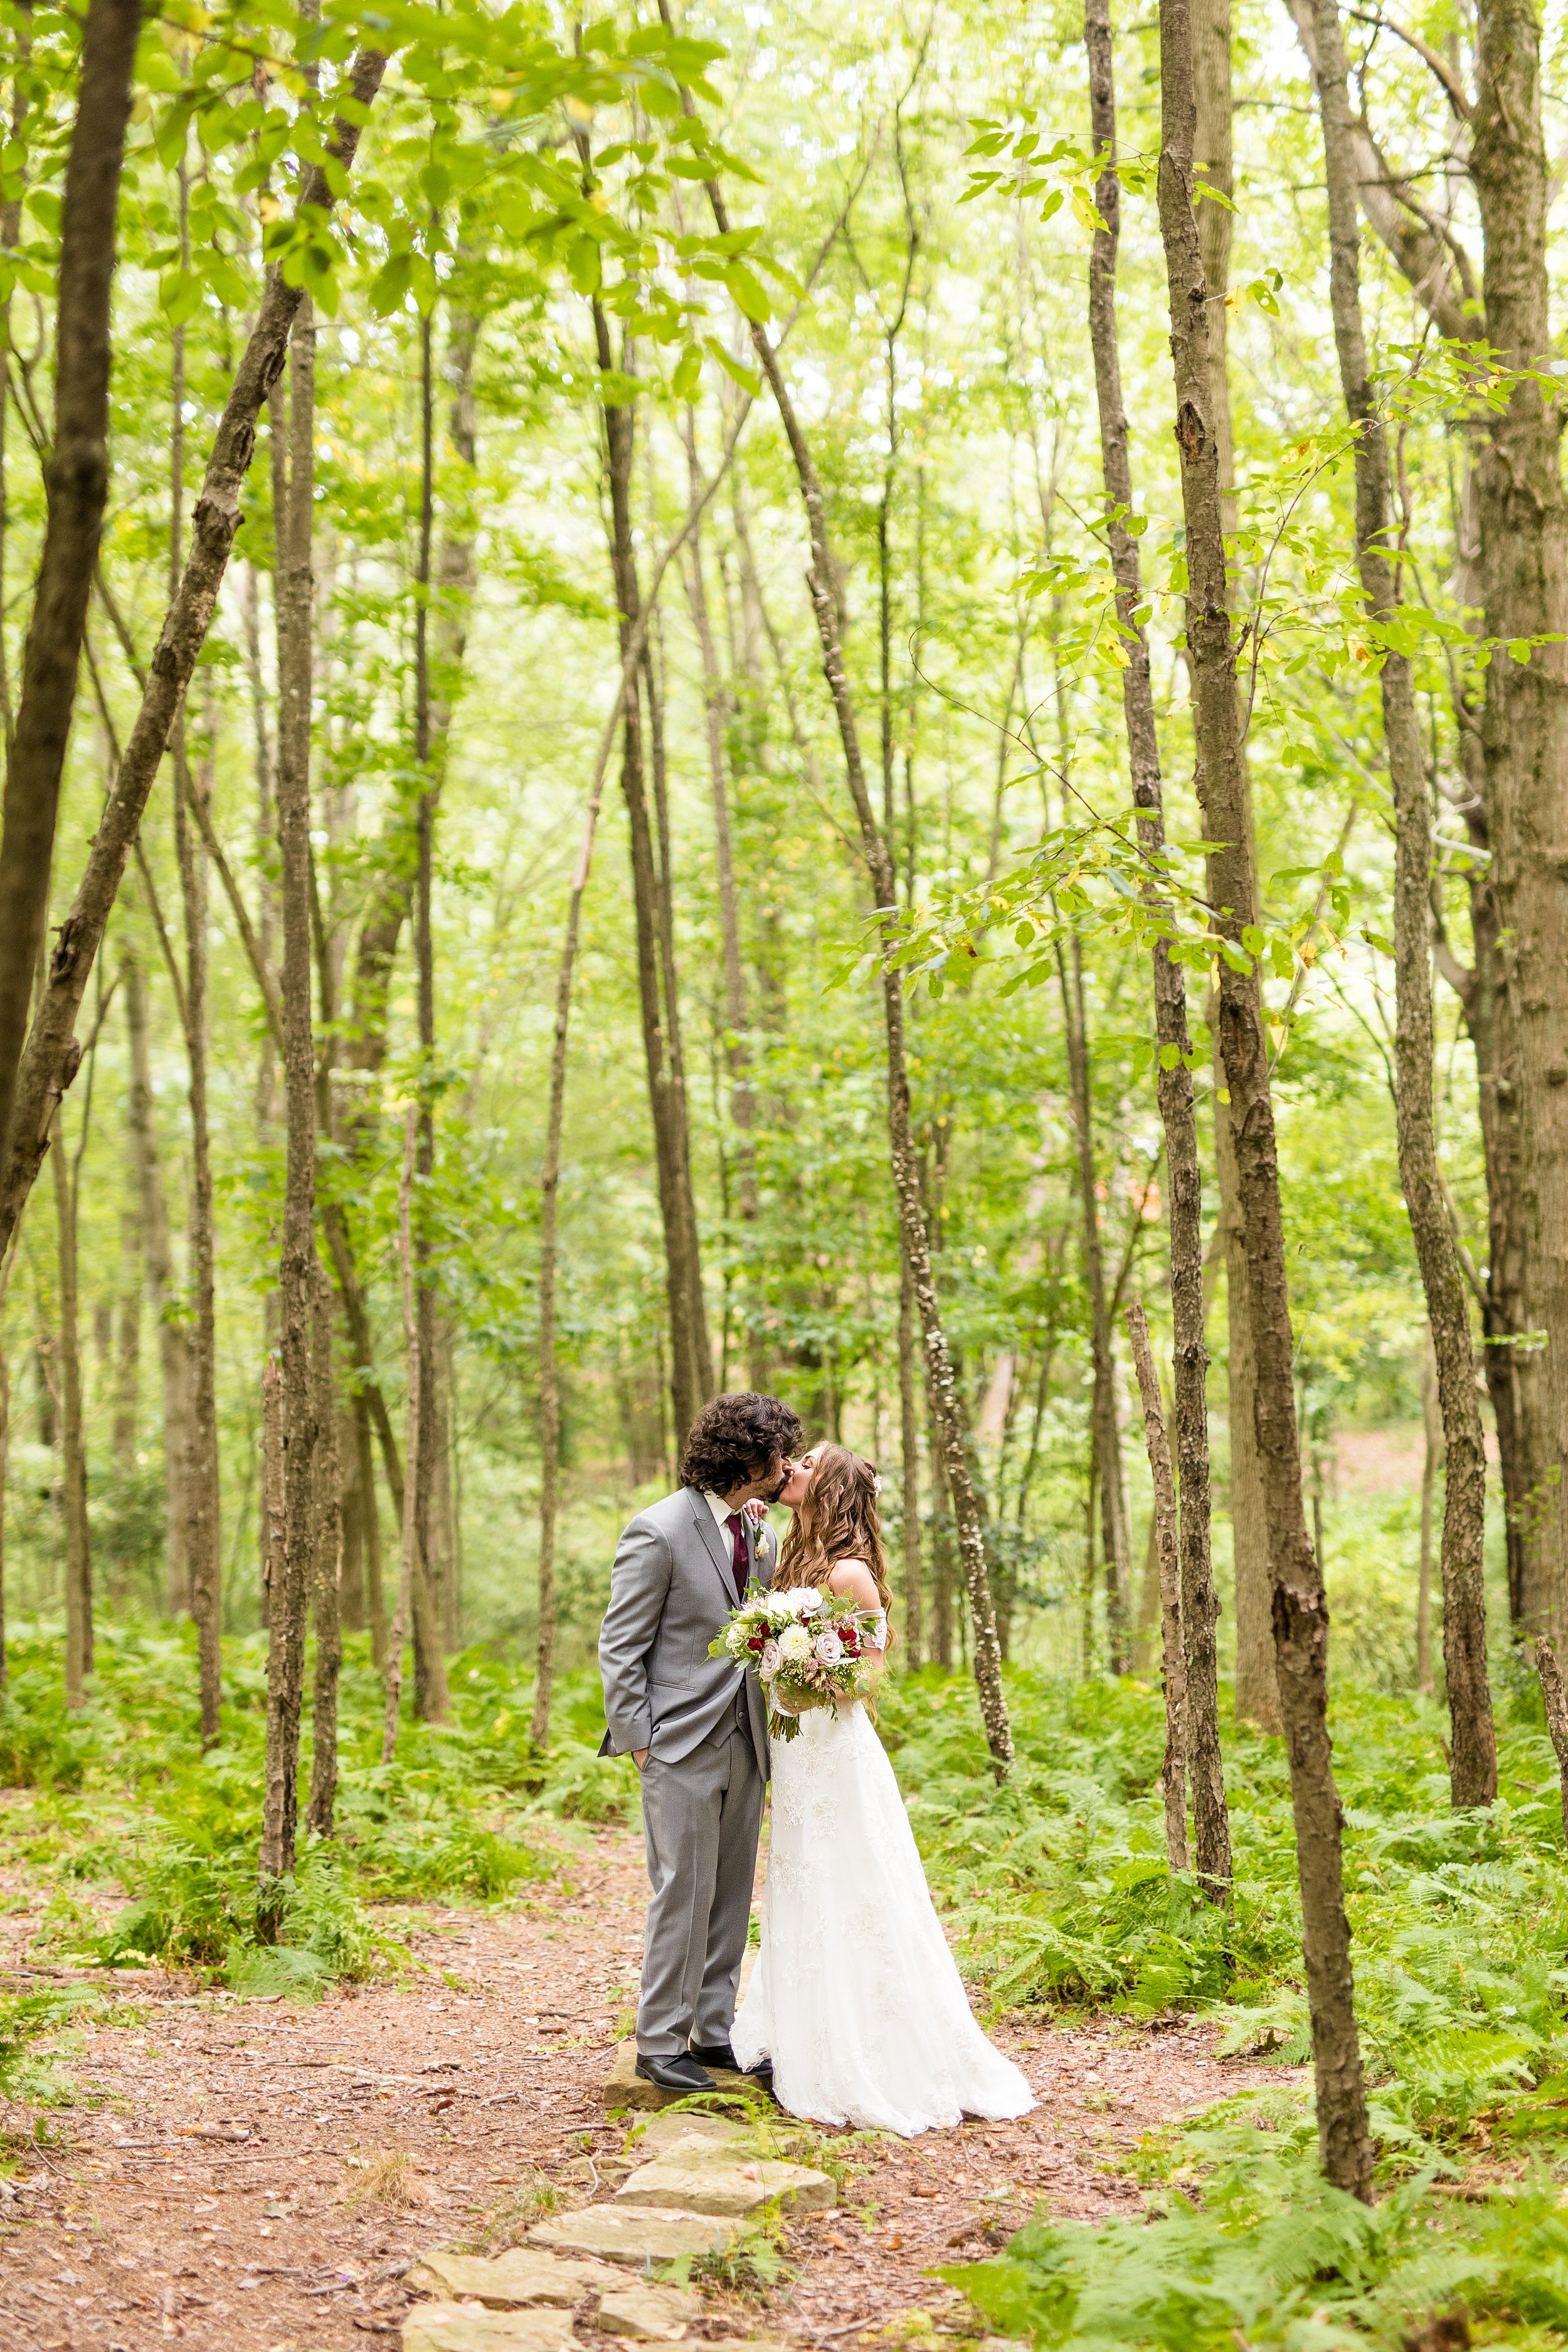 pinehall at eisler farms wedding photos, butler wedding venues, lord of the rings inspired wedding, book lover wedding inspiration, pittsburgh wedding photographer